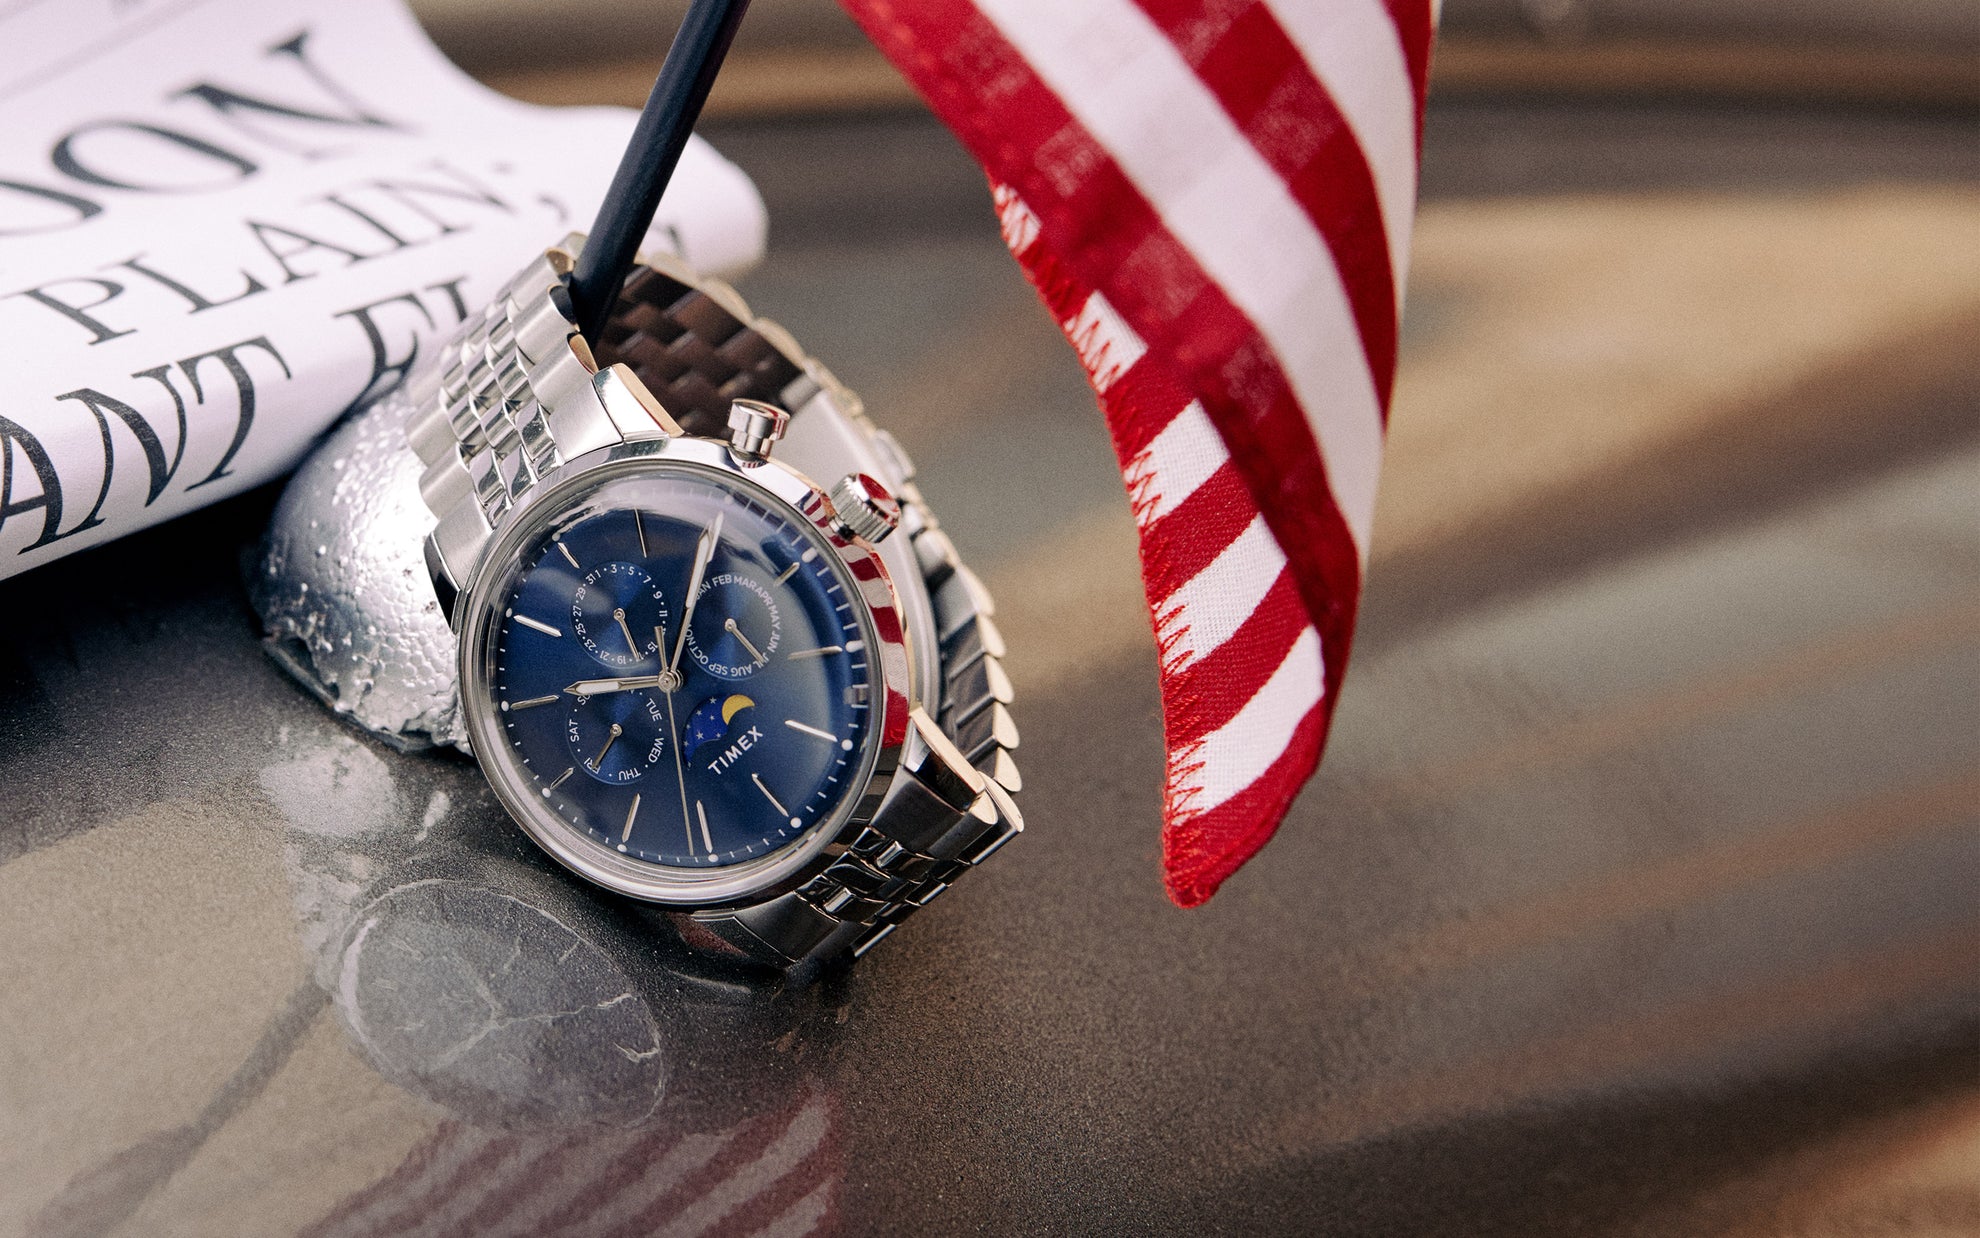 Image features our marlin moon phase watch which has a blue dial and a silver tone bracelet.  The watch is leaning on a half moon which is holding the American Flag